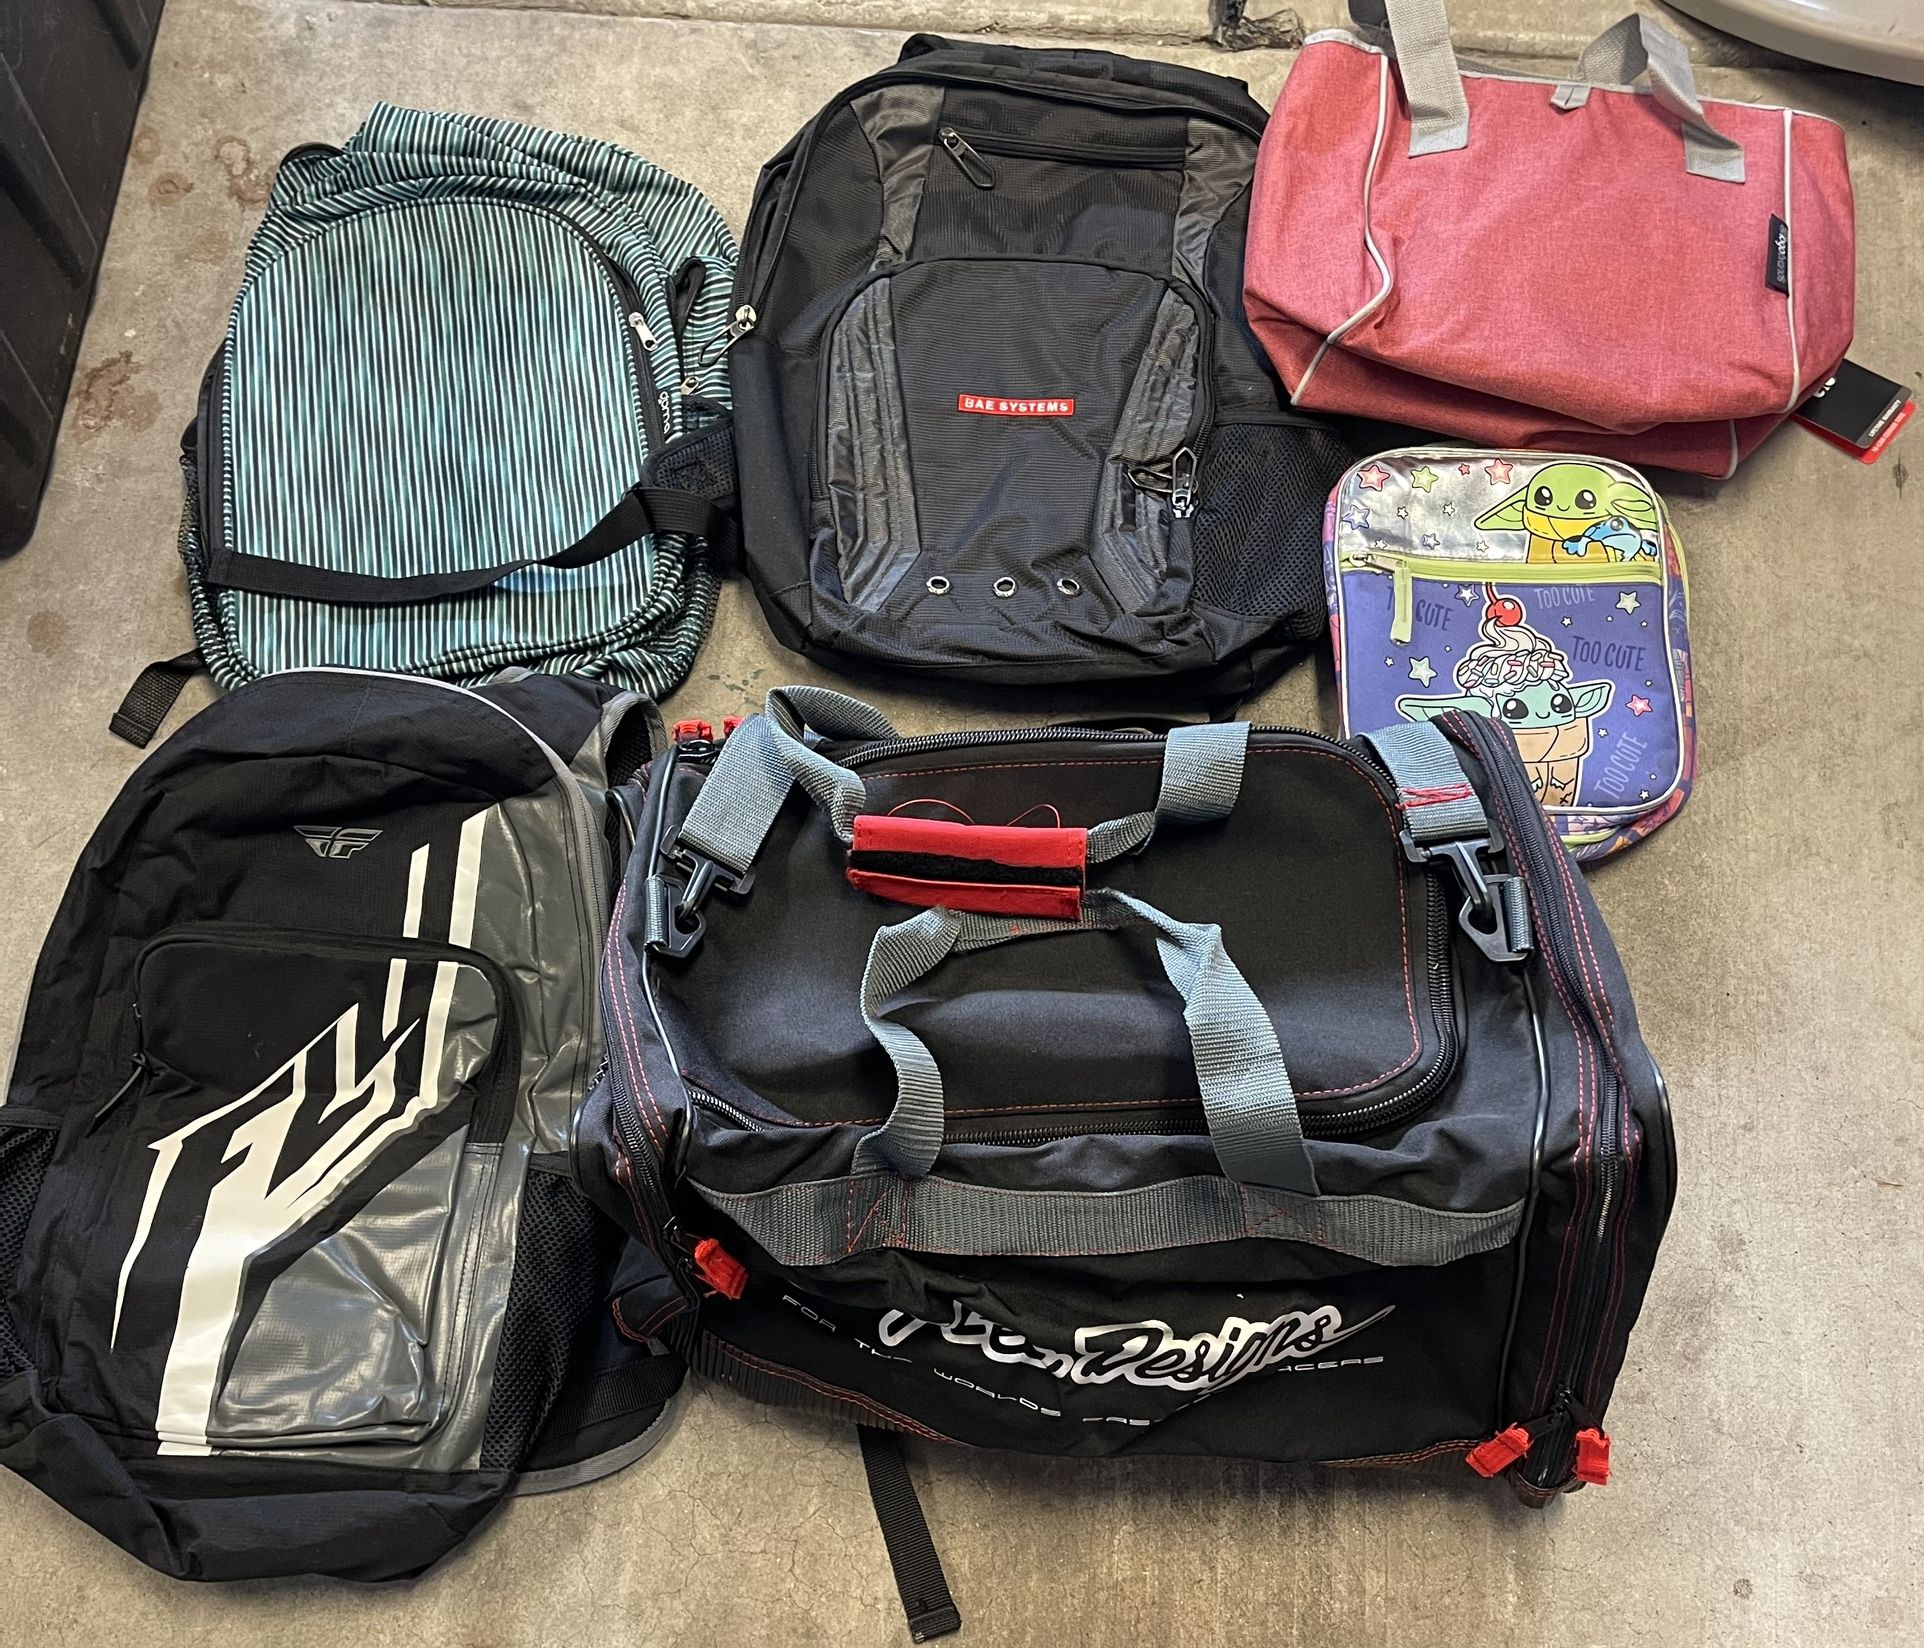 Back Packs, Duffle, Lunch Bag, Cooler 6 Total Bags All For $20